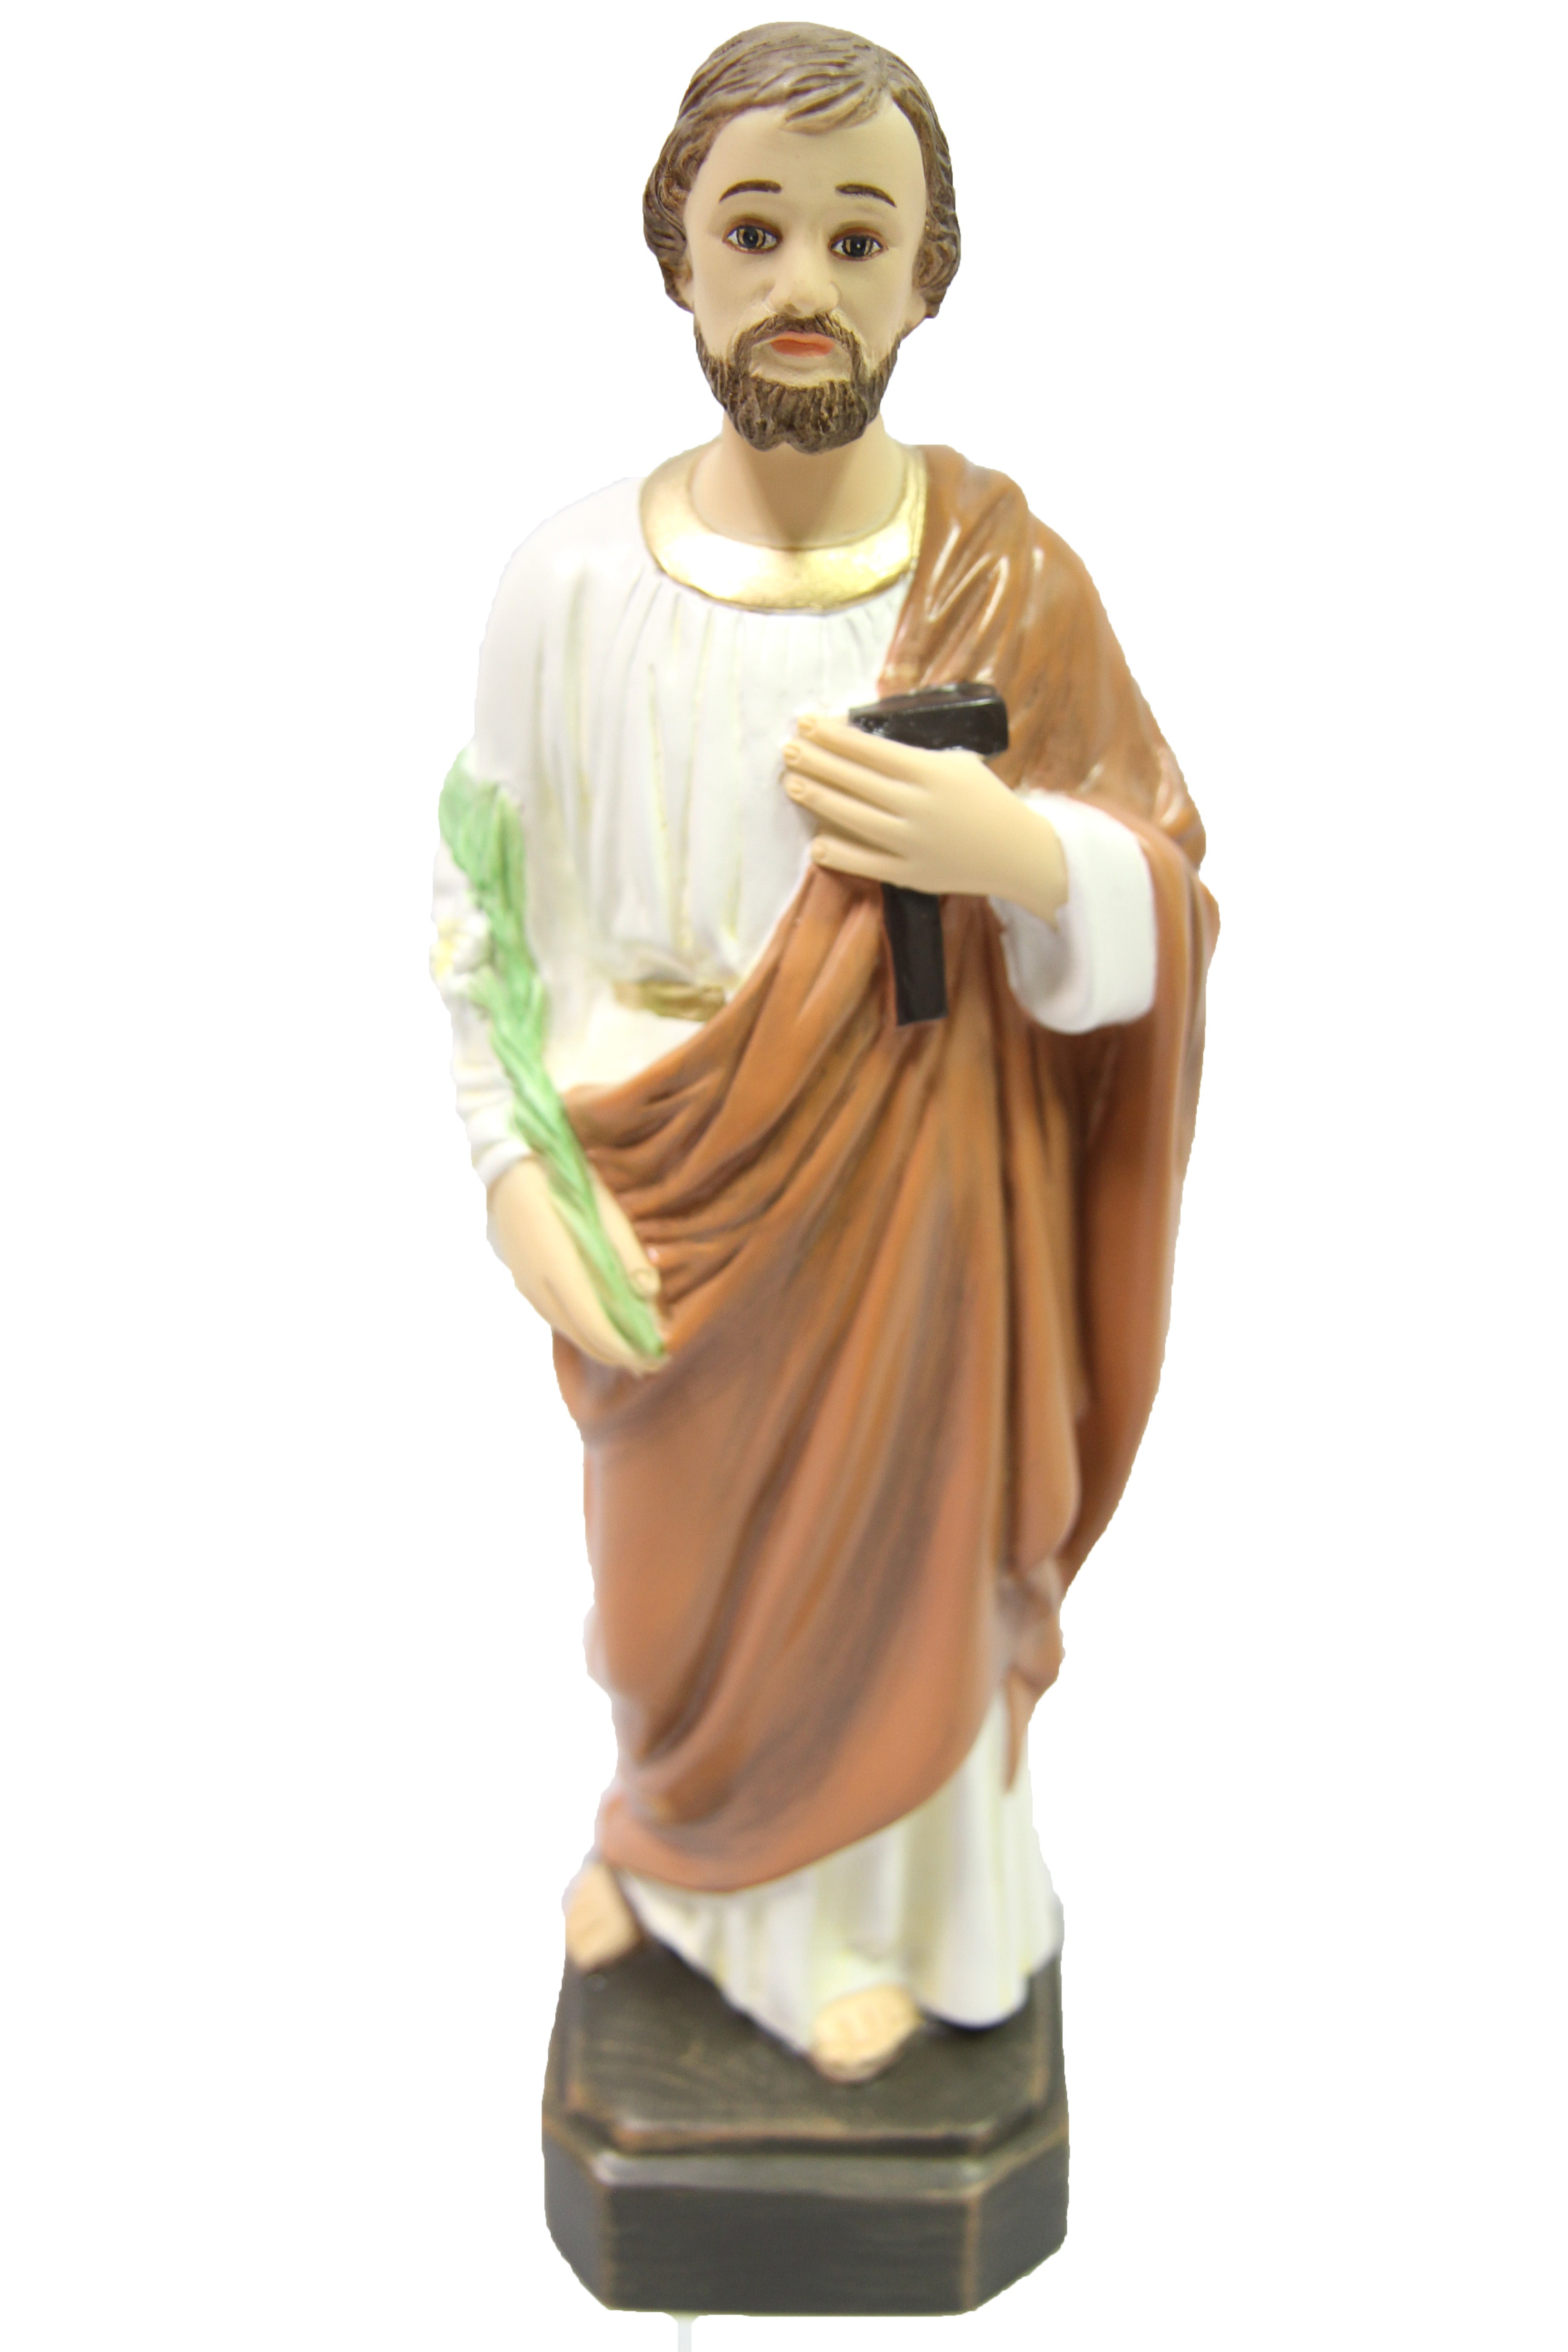 12 Inch Saint Joseph the Worker Catholic Statue Figurine Vittoria Collection Made in Italy Religious